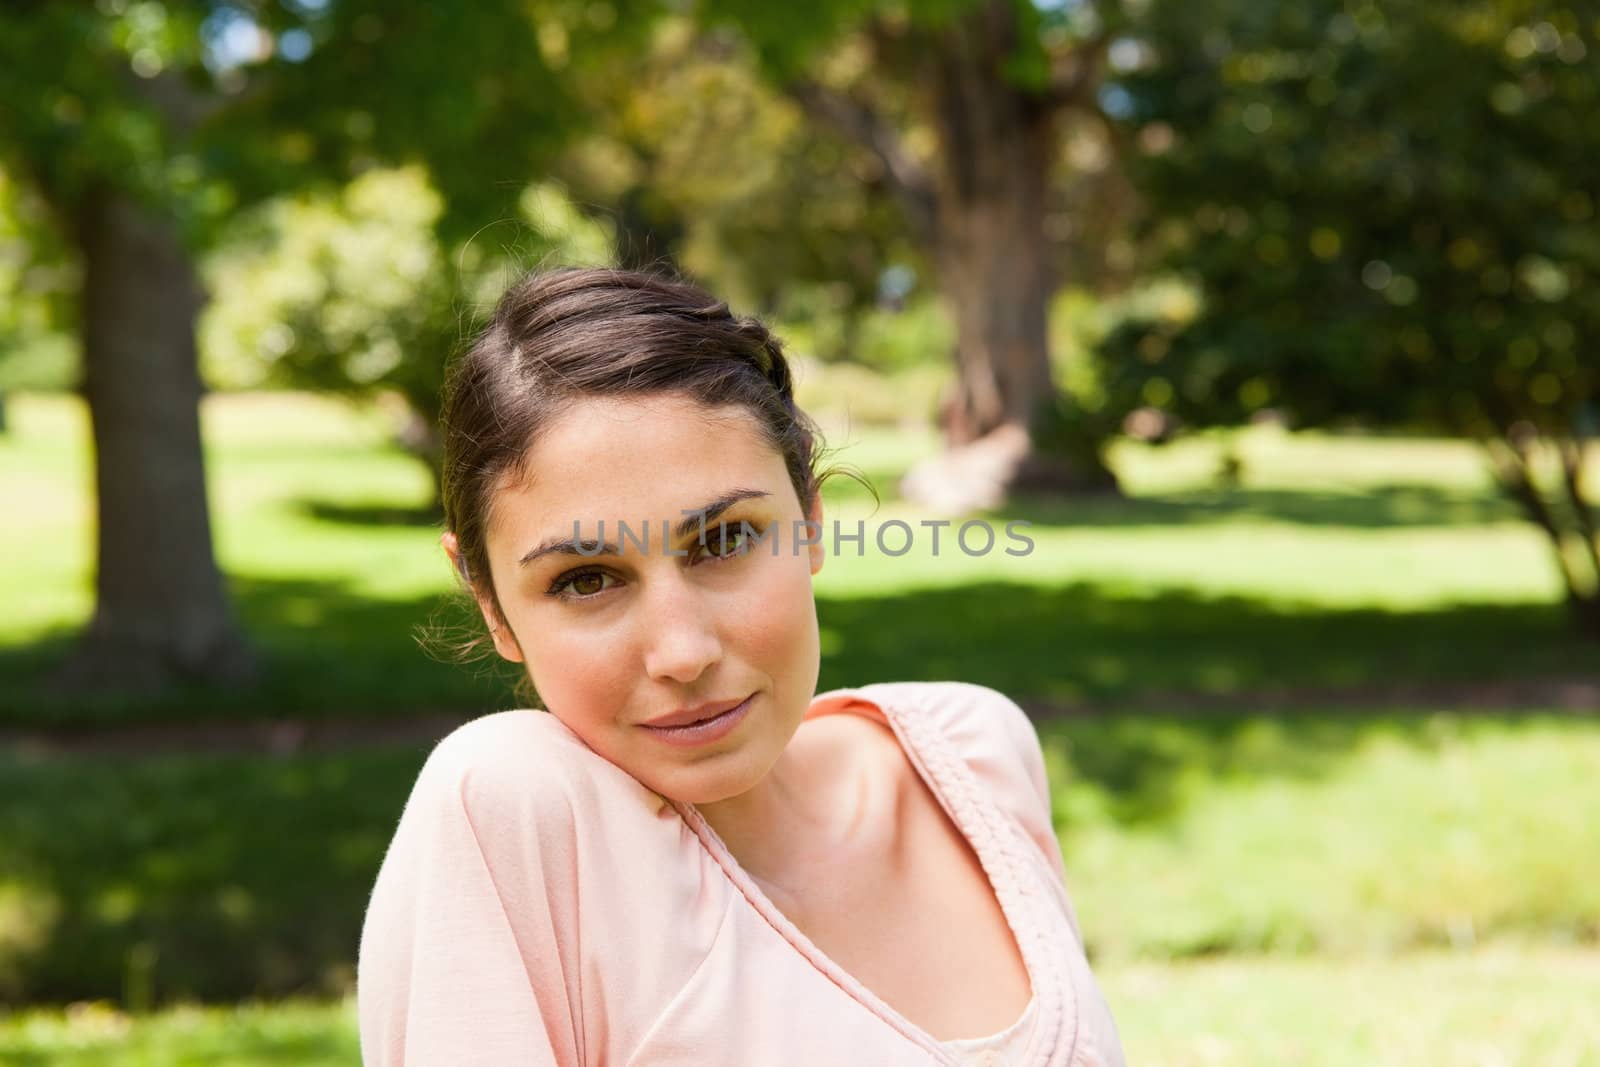 Woman with a serious expression looking ahead by Wavebreakmedia